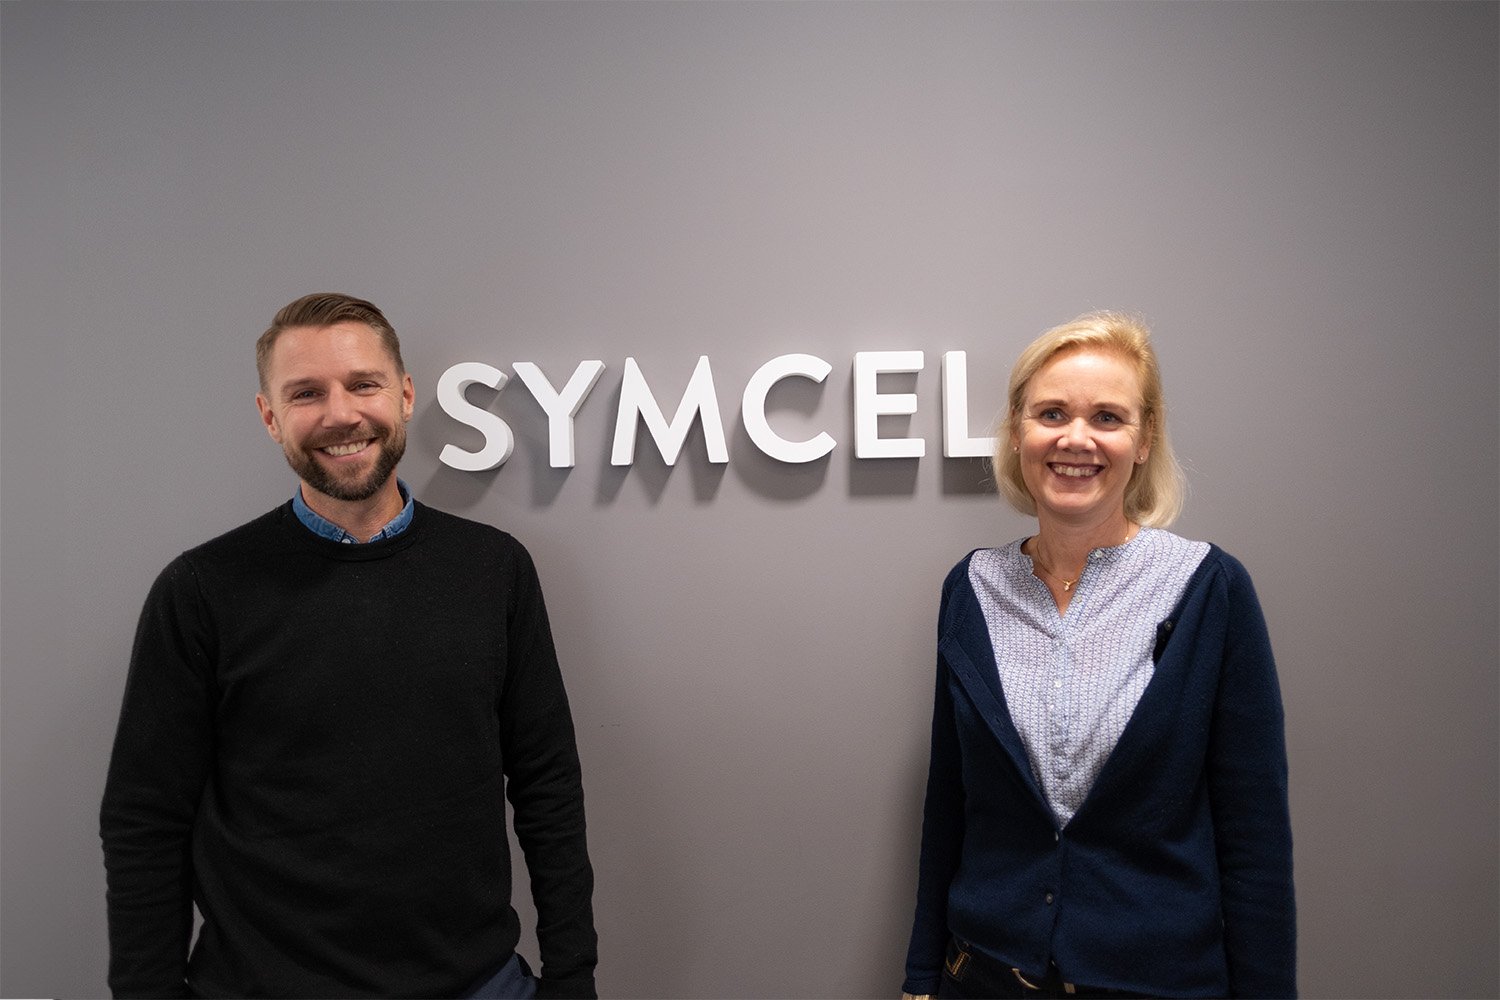 Symcel Appoints Pia van der Zee as Chief Commercial Officer to Spearhead Growth in Emerging Clinical Markets